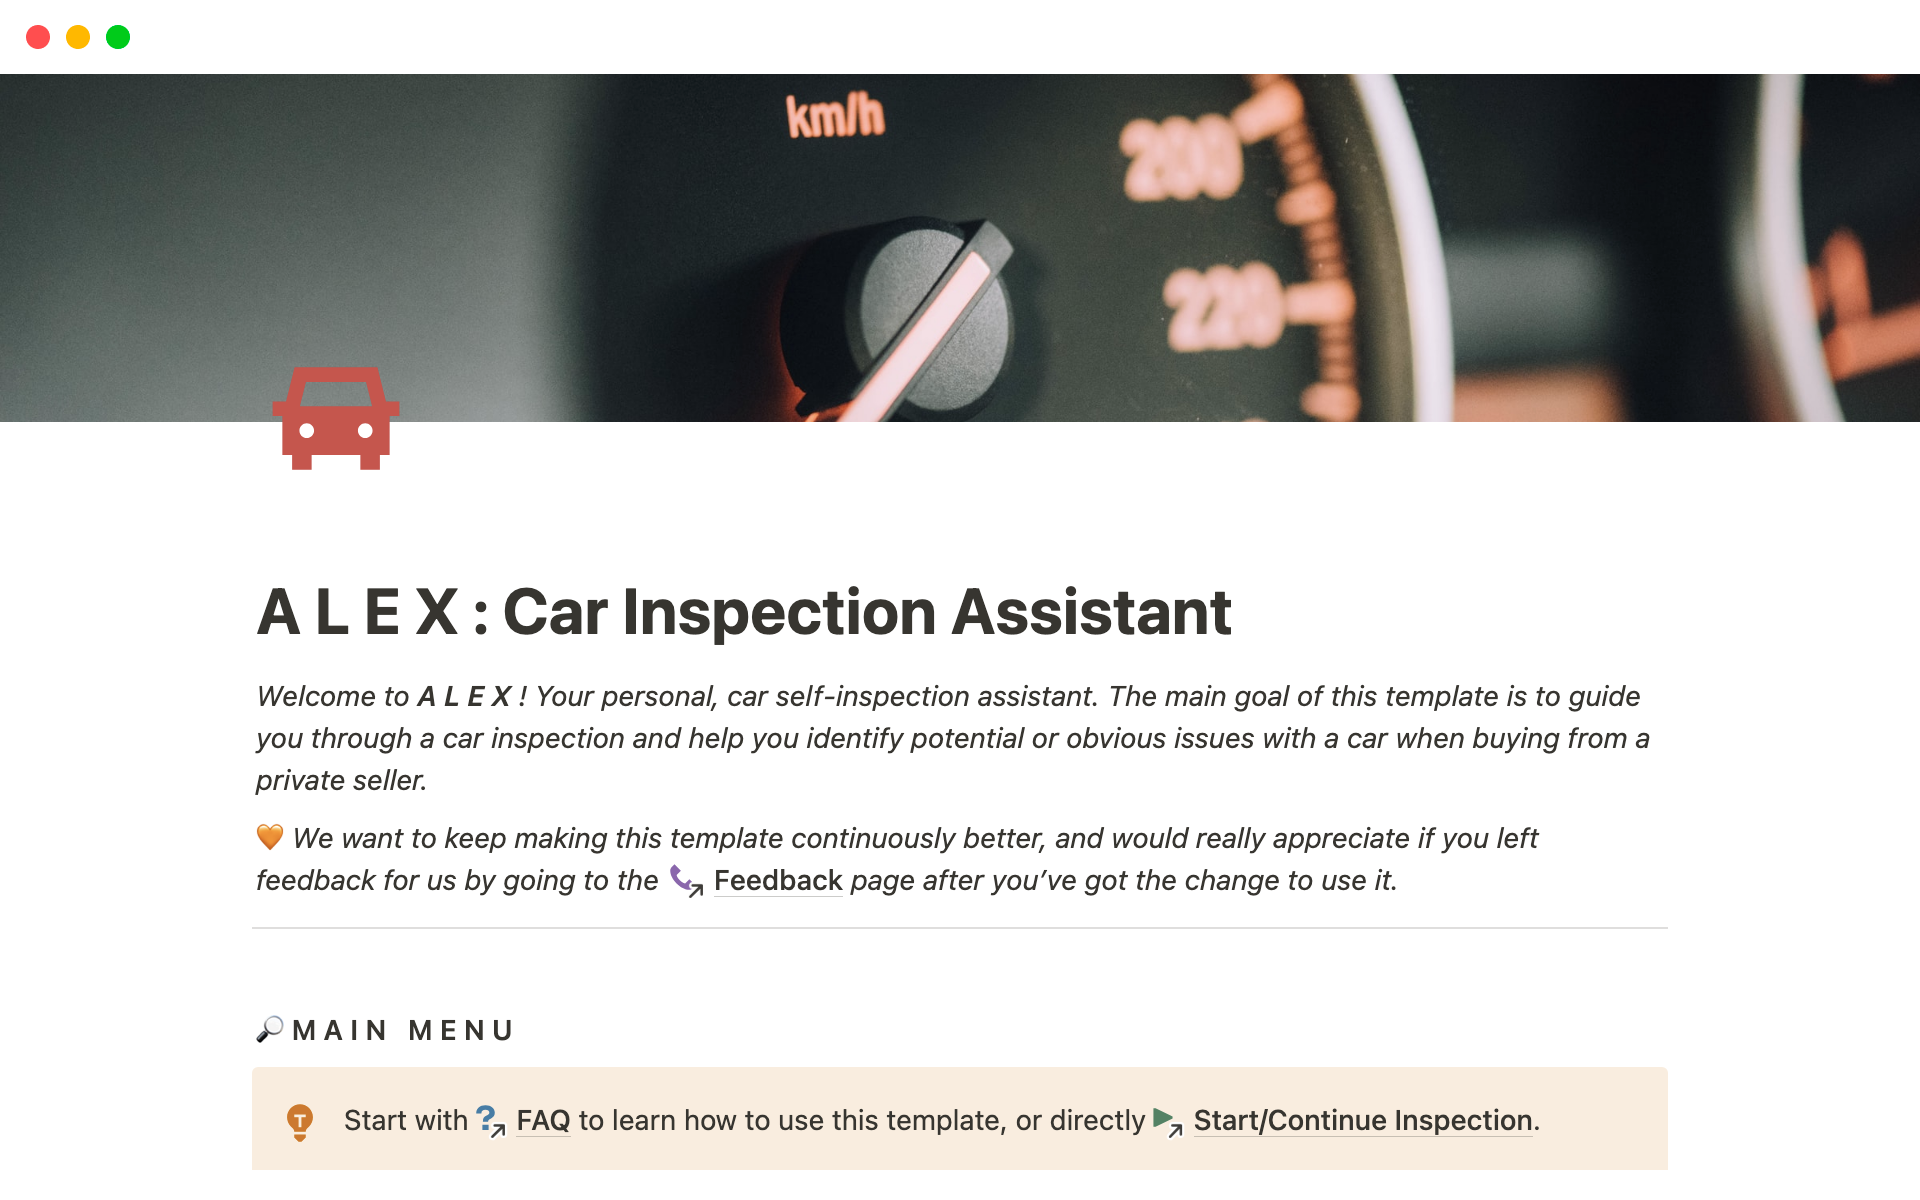 Guides people through a car inspection process.